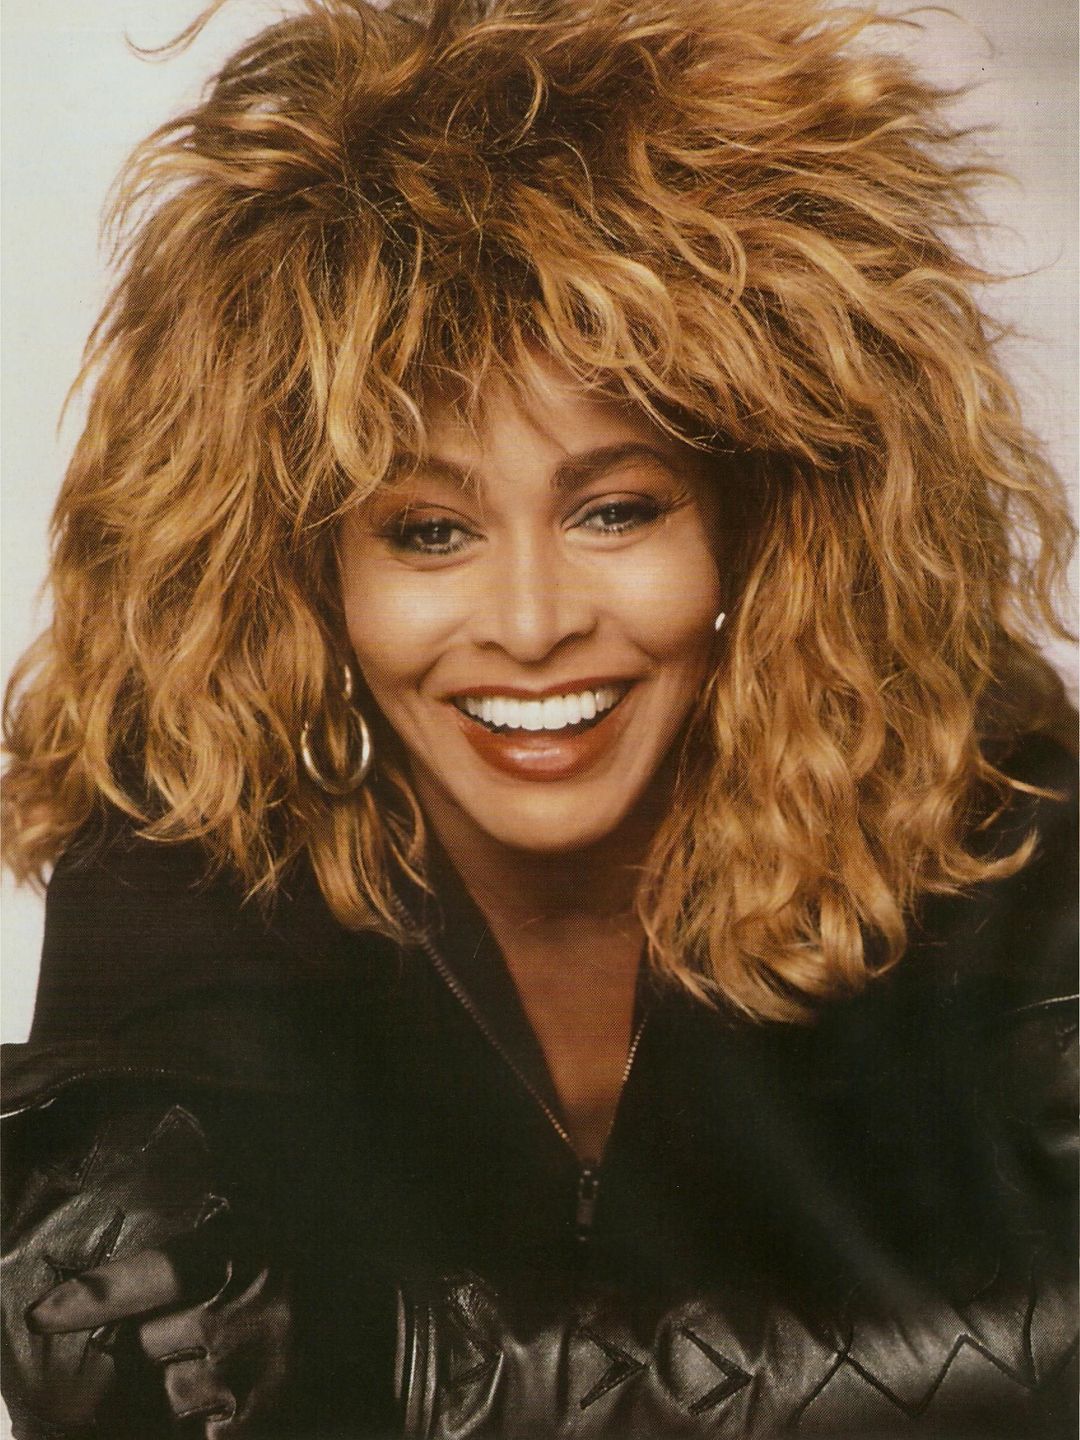 Tina Turner who are her parents